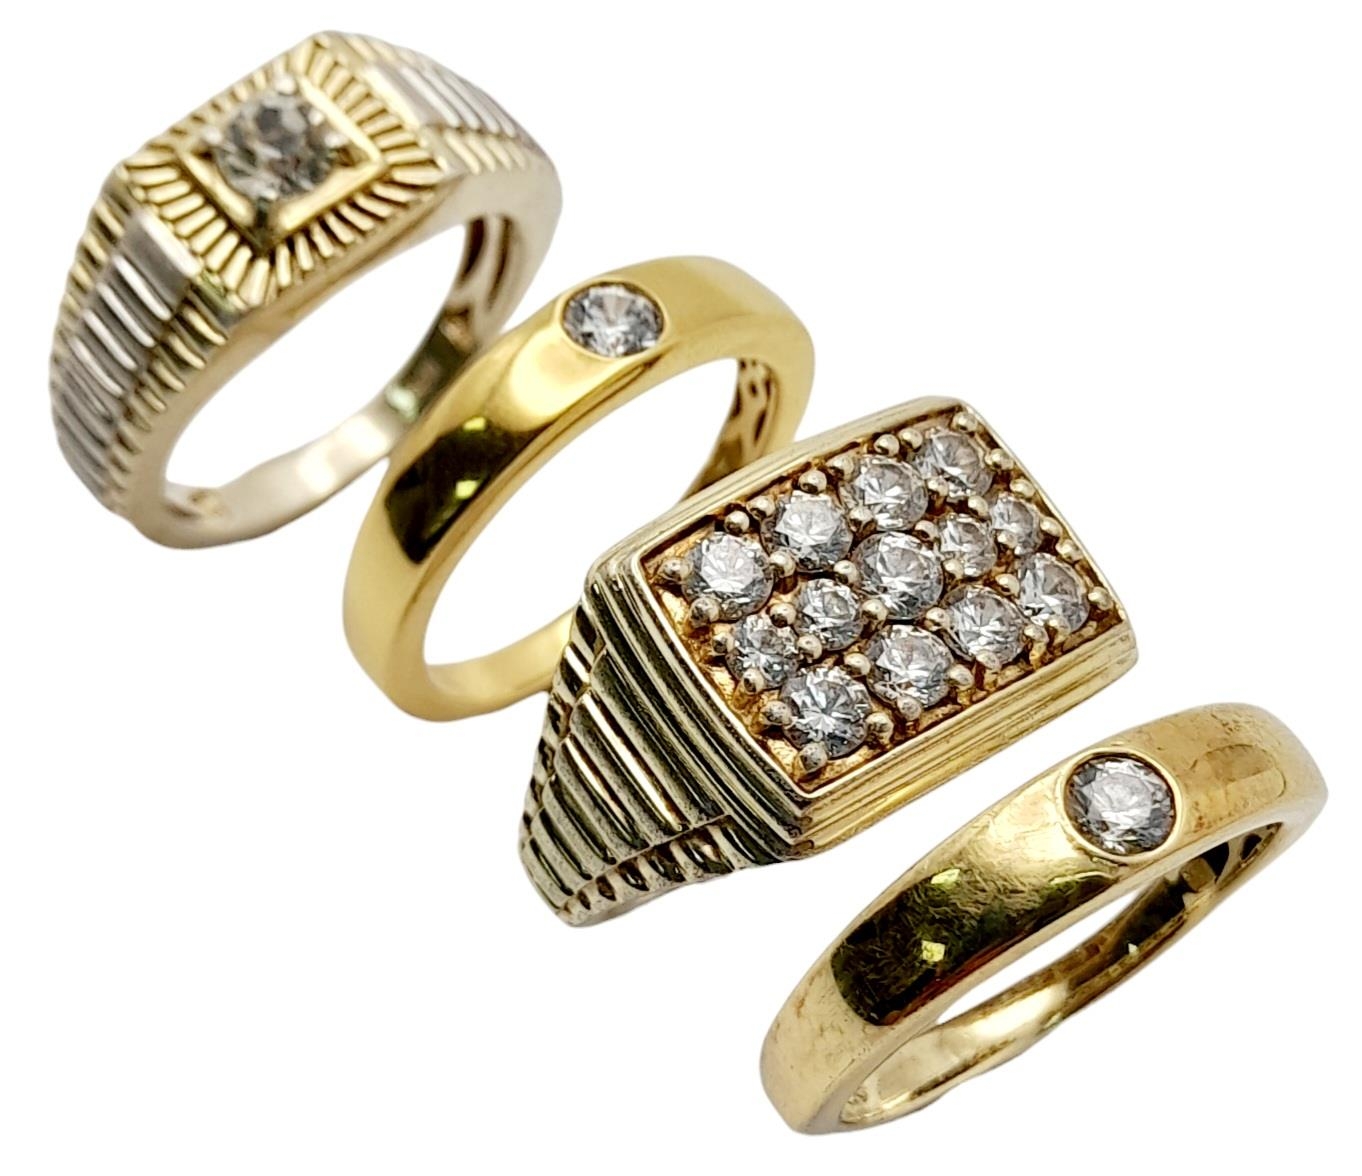 Four Different Style Gilded 925 Silver Rings. All size S.